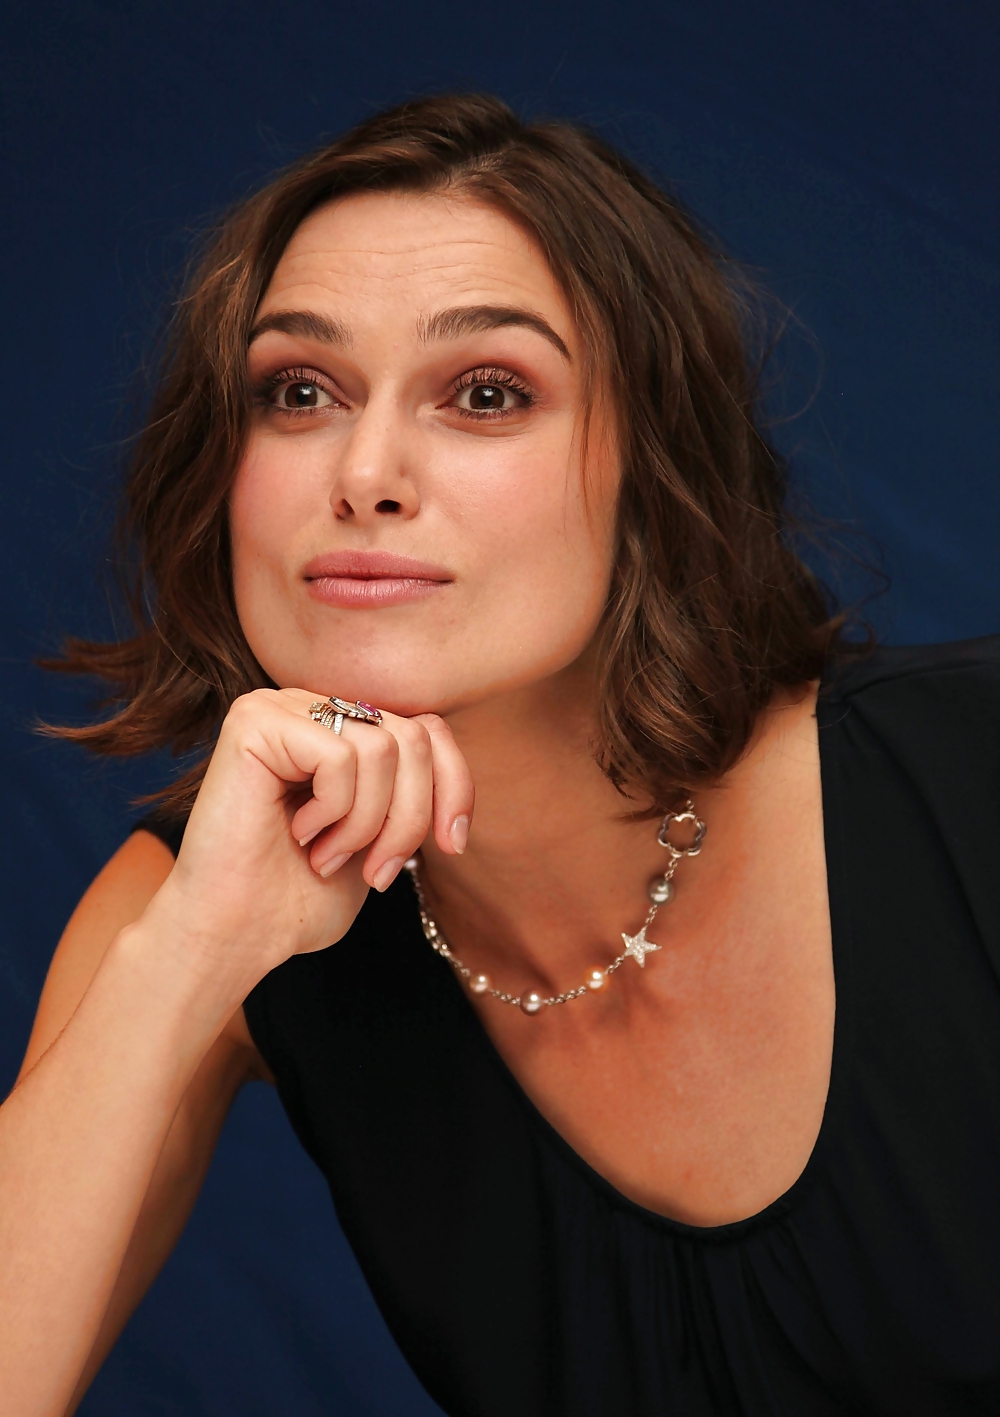 Keira Knightley The Royal Lady of England #35650419